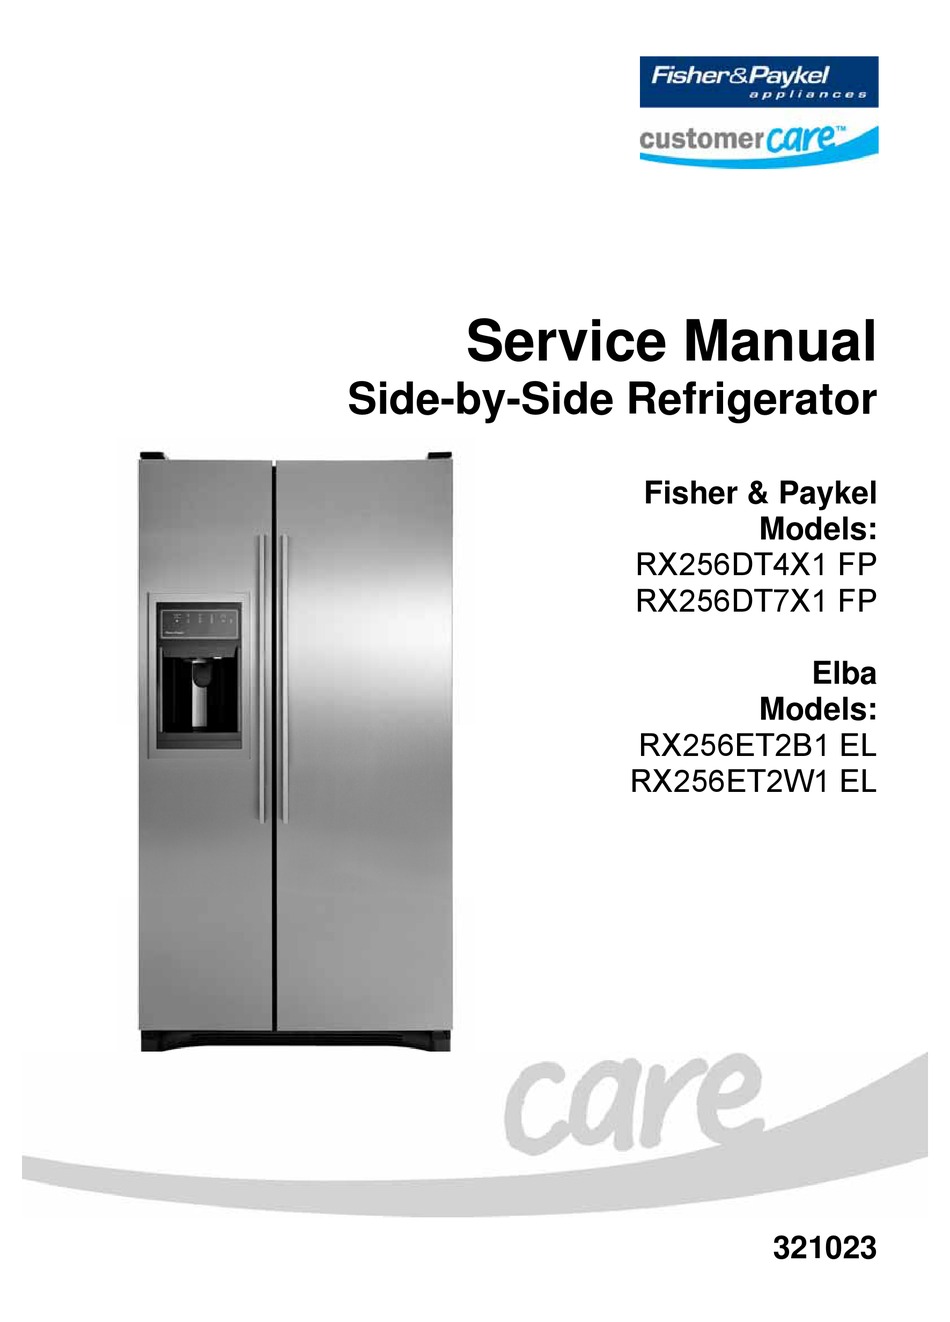 FISHER & PAYKEL RX256DT4X1 FP SERVICE MANUAL Pdf Download | ManualsLib